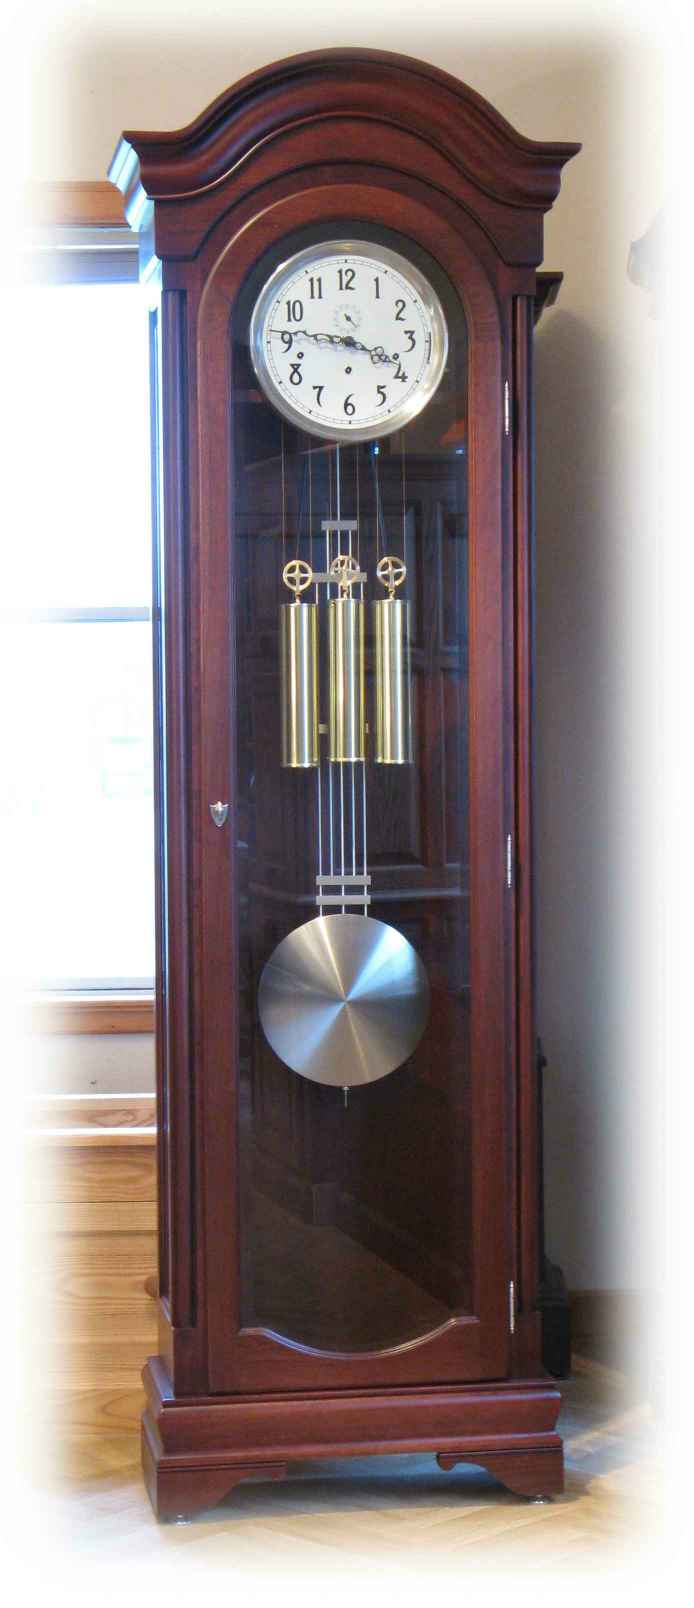 Orleans Grandfather clock